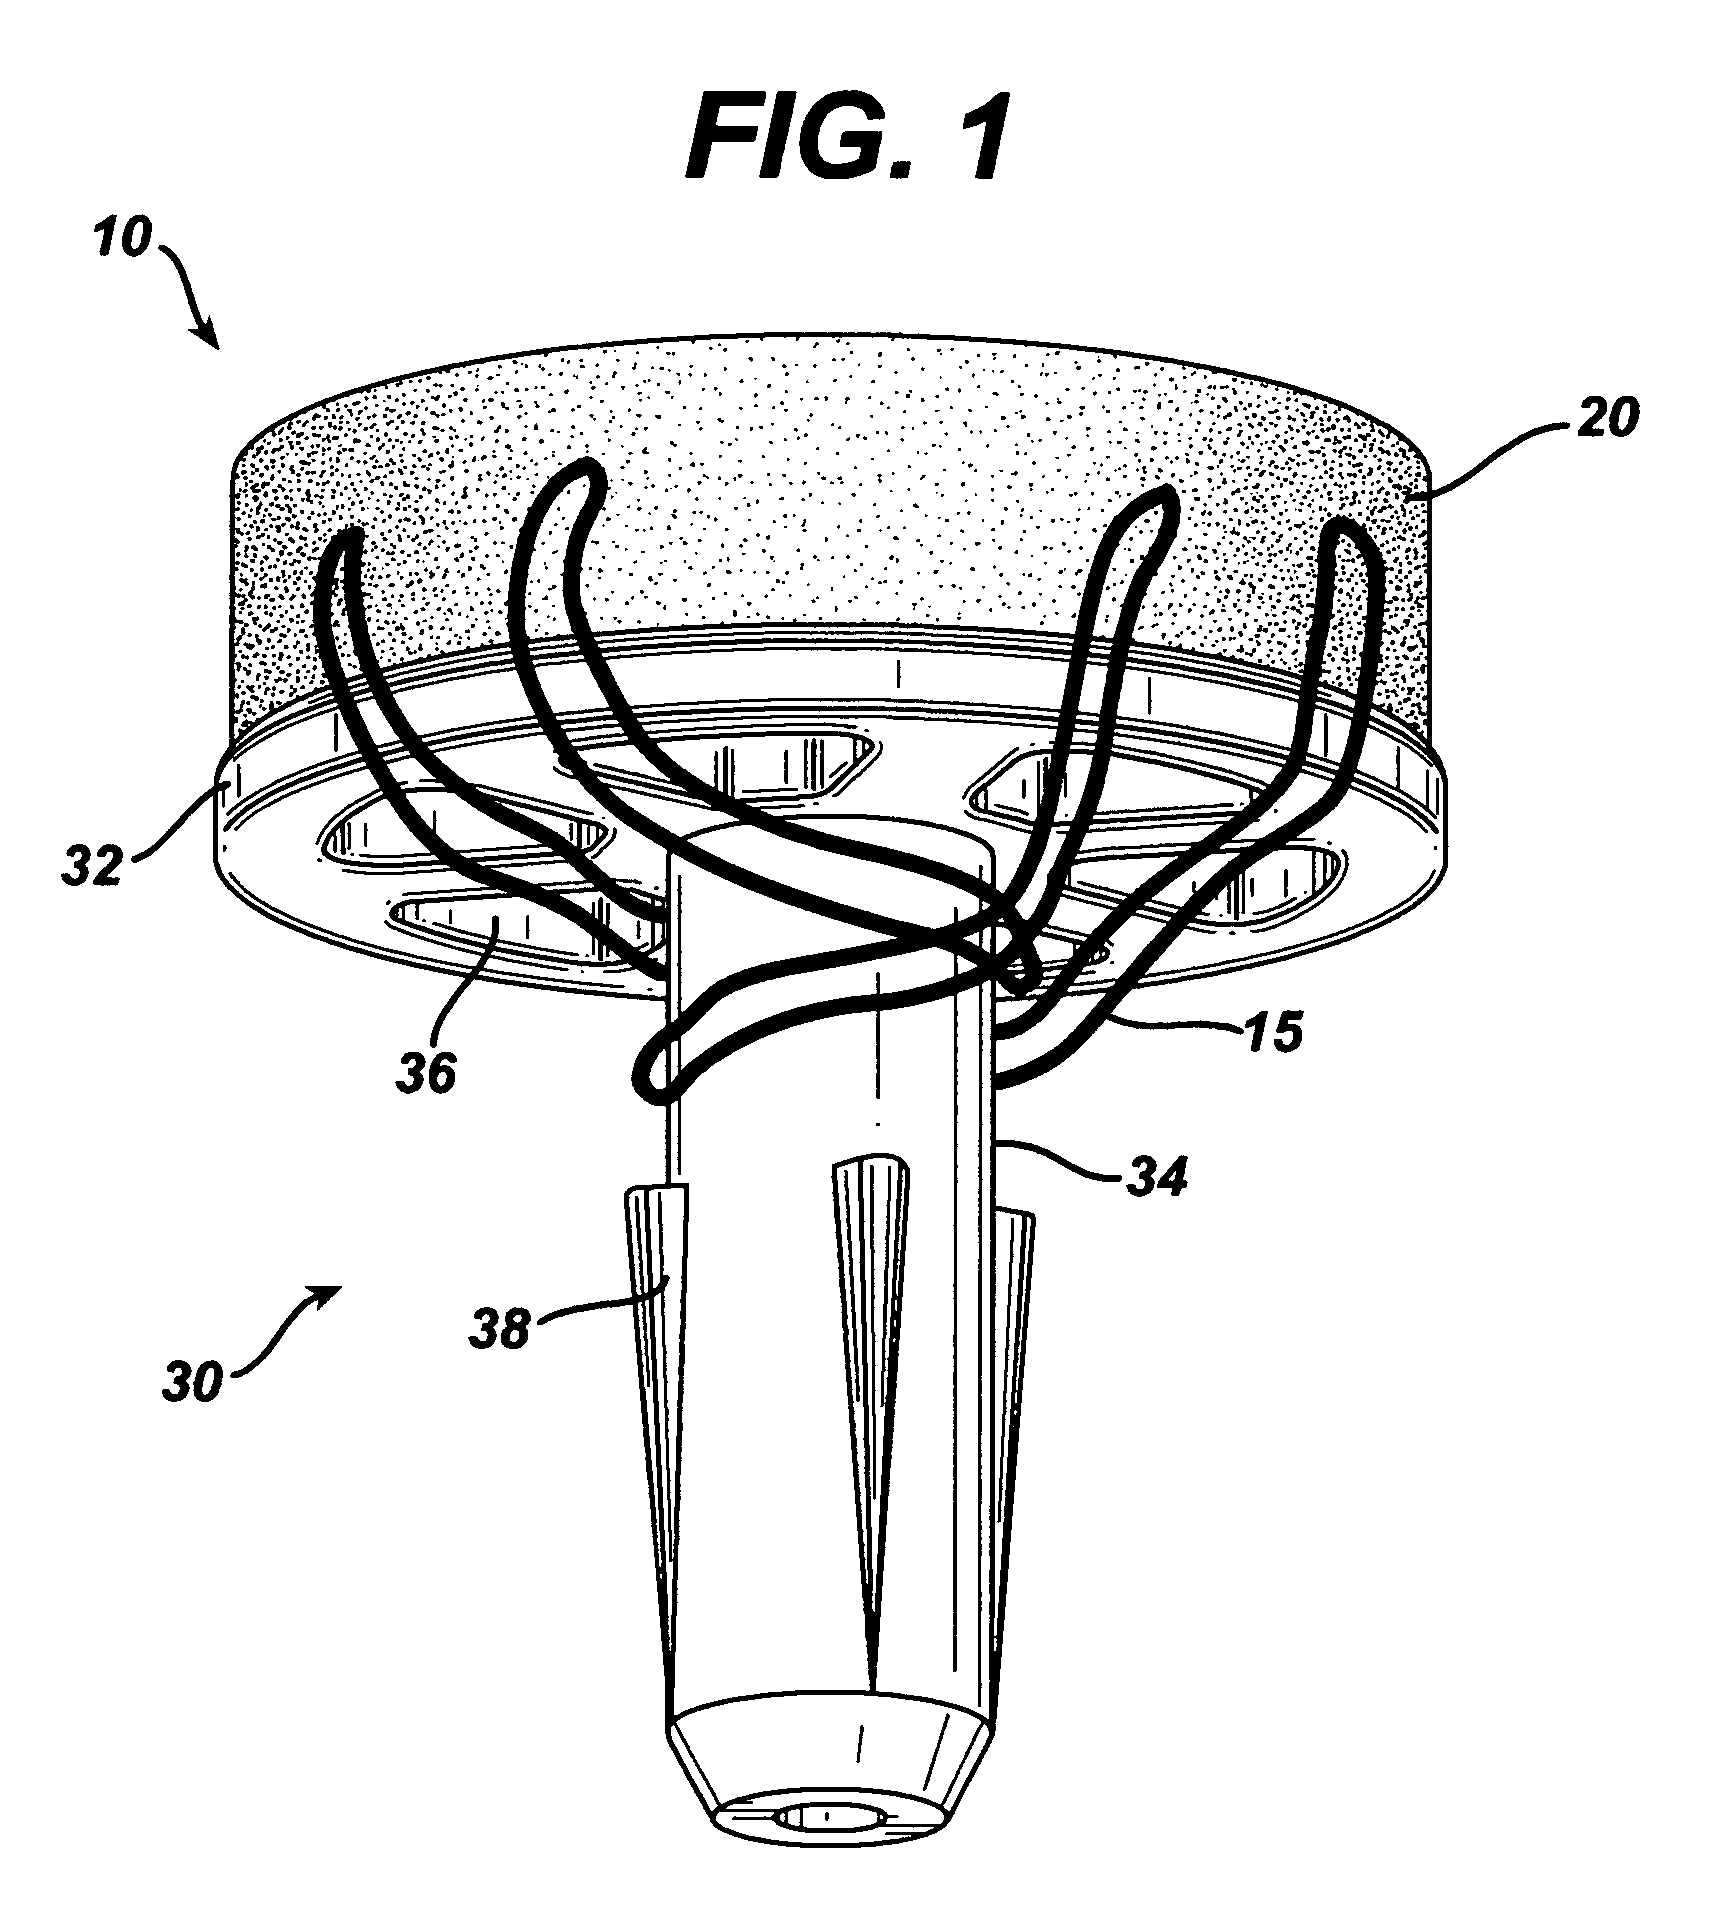 Attachment of absorbable tissue scaffolds to fixation devices